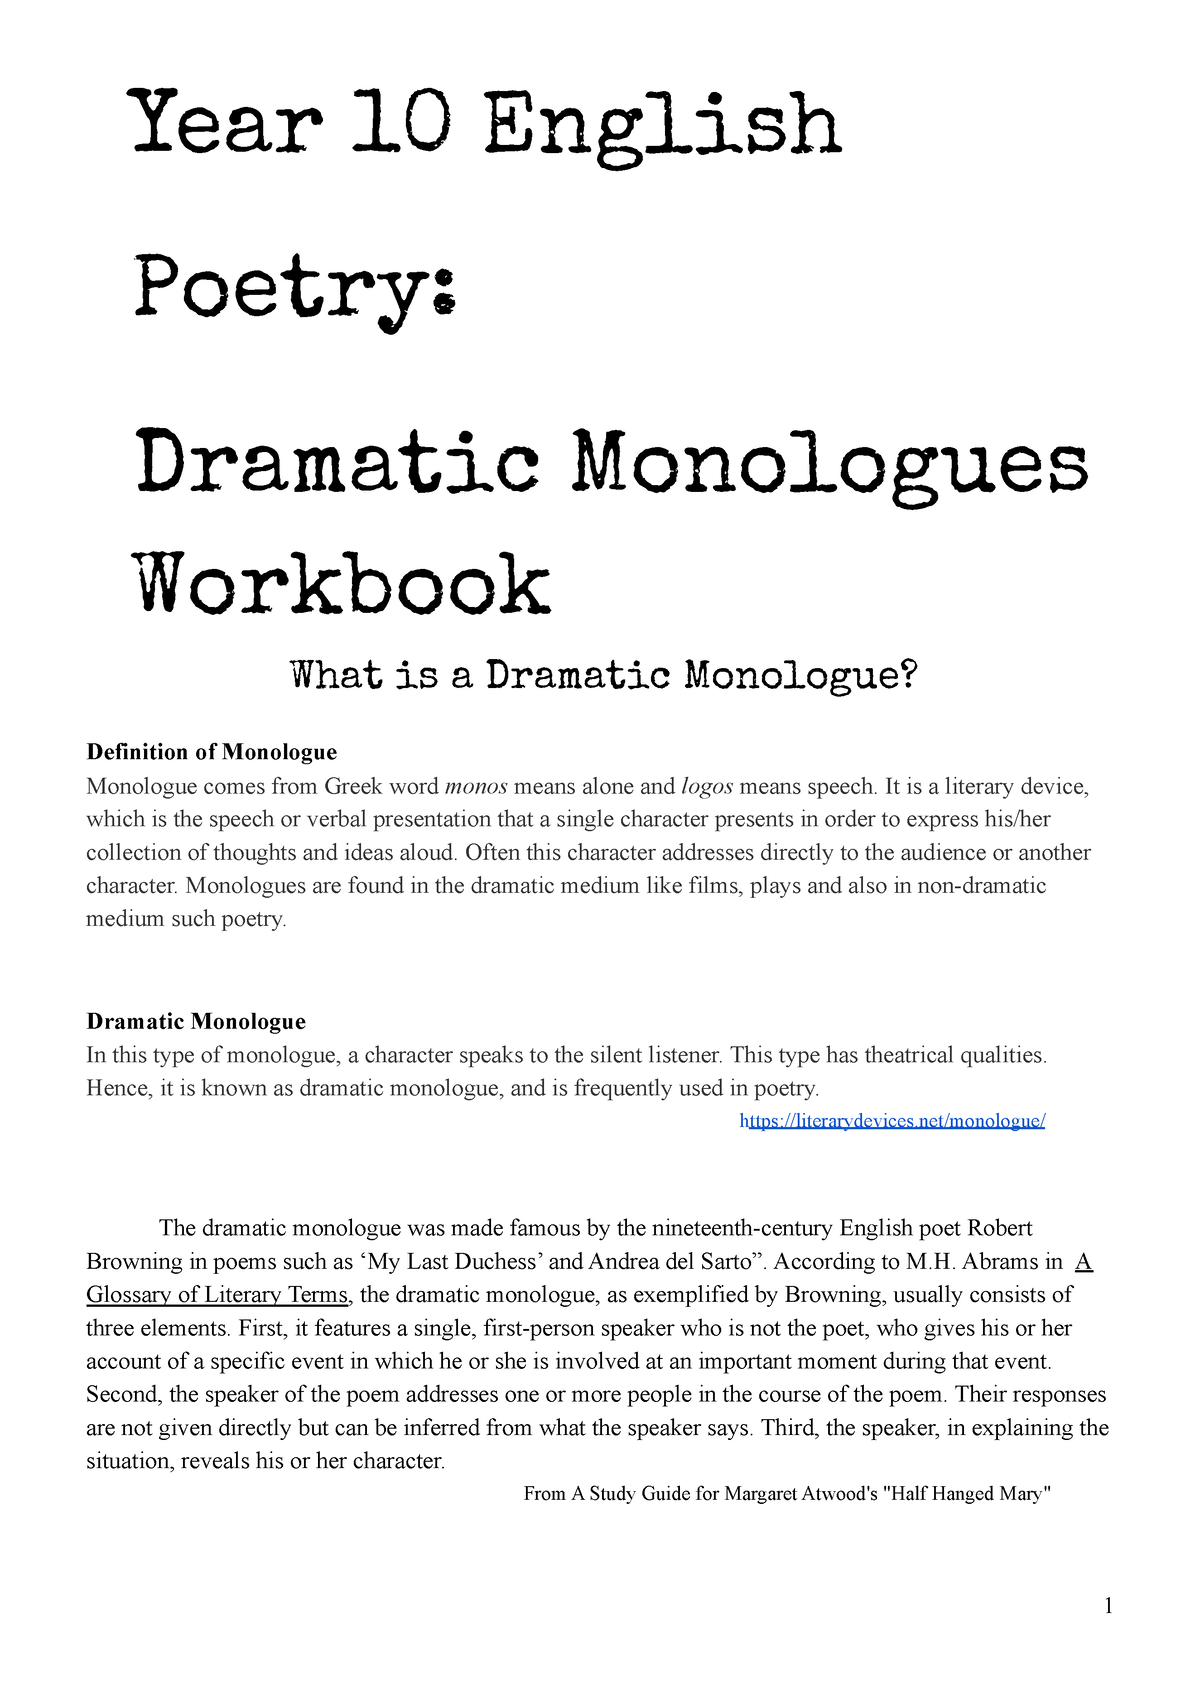 2021-year-10-dramatic-monologues-booklet-year-10-english-poetry